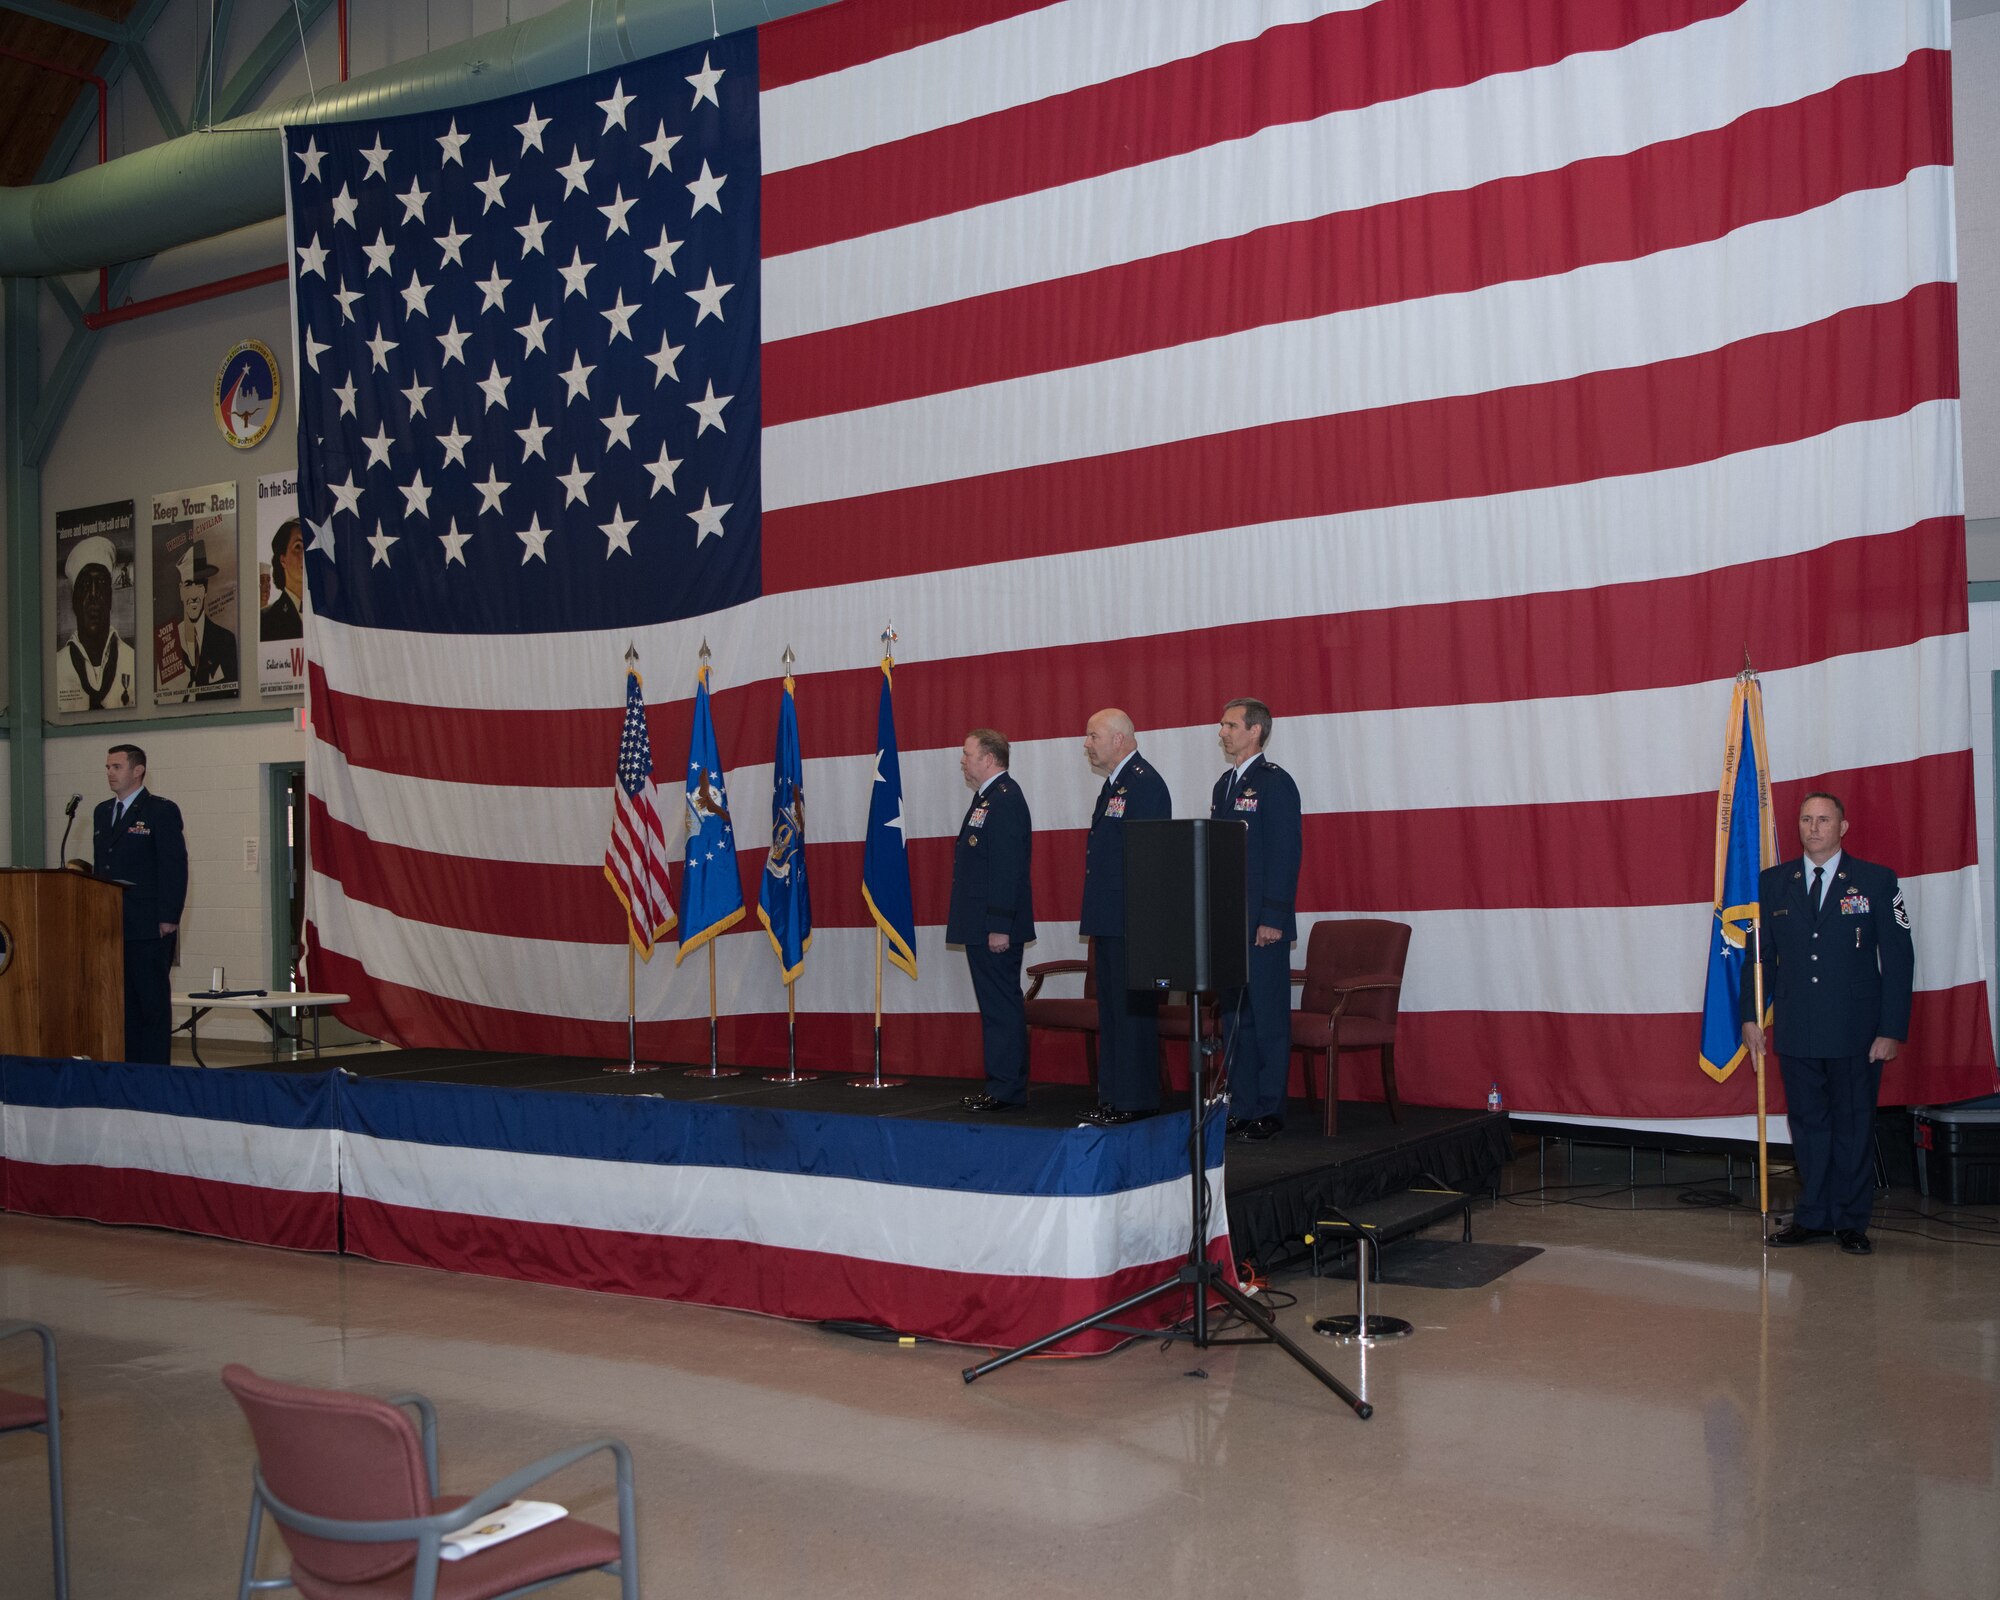 Lt. Gen. Richard Scobee, Chief of the Air Force Reserve and Commander Air Force Reserve Command, Maj. Gen. Brian Borgen, Commander Tenth Air Force (outgoing) and Maj. Gen. Bryan Radliff, Commander Tenth Air Force (incoming), stand at attention as the Dyess Honor Guard exits after presenting the colors.